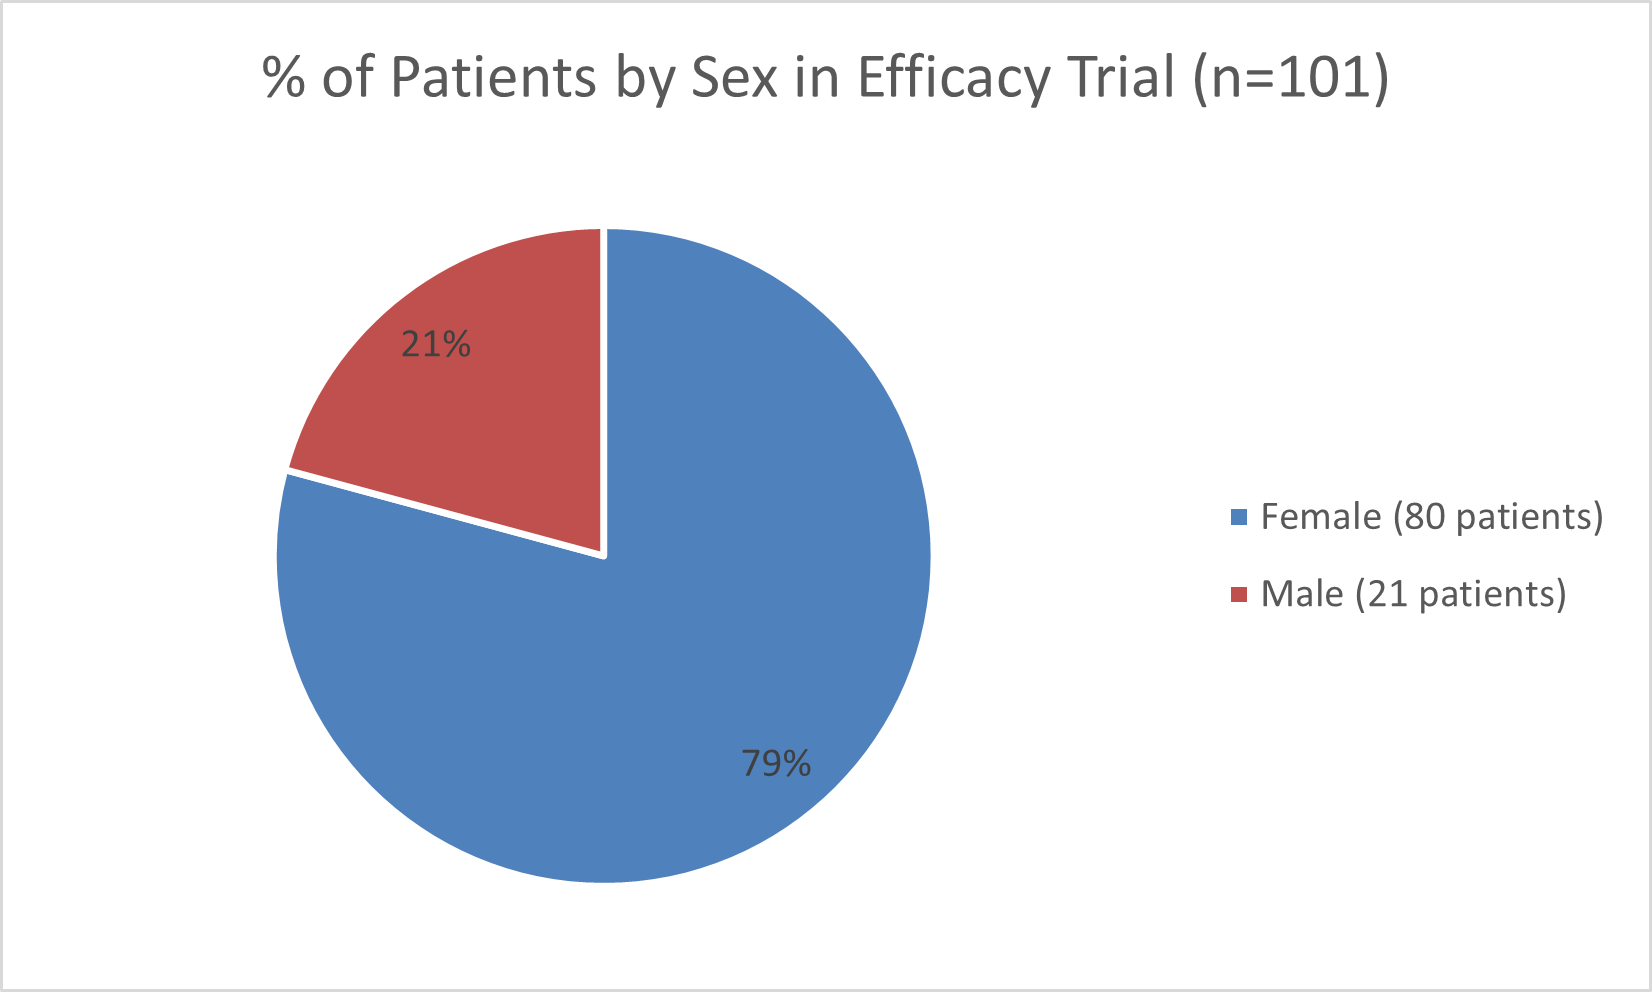 Pie chart summarizing how many males and females were in the clinical trial used to evaluate the efficacy. In total, 21 (21%) males and 80 (79%) females participated in the clinical trial.